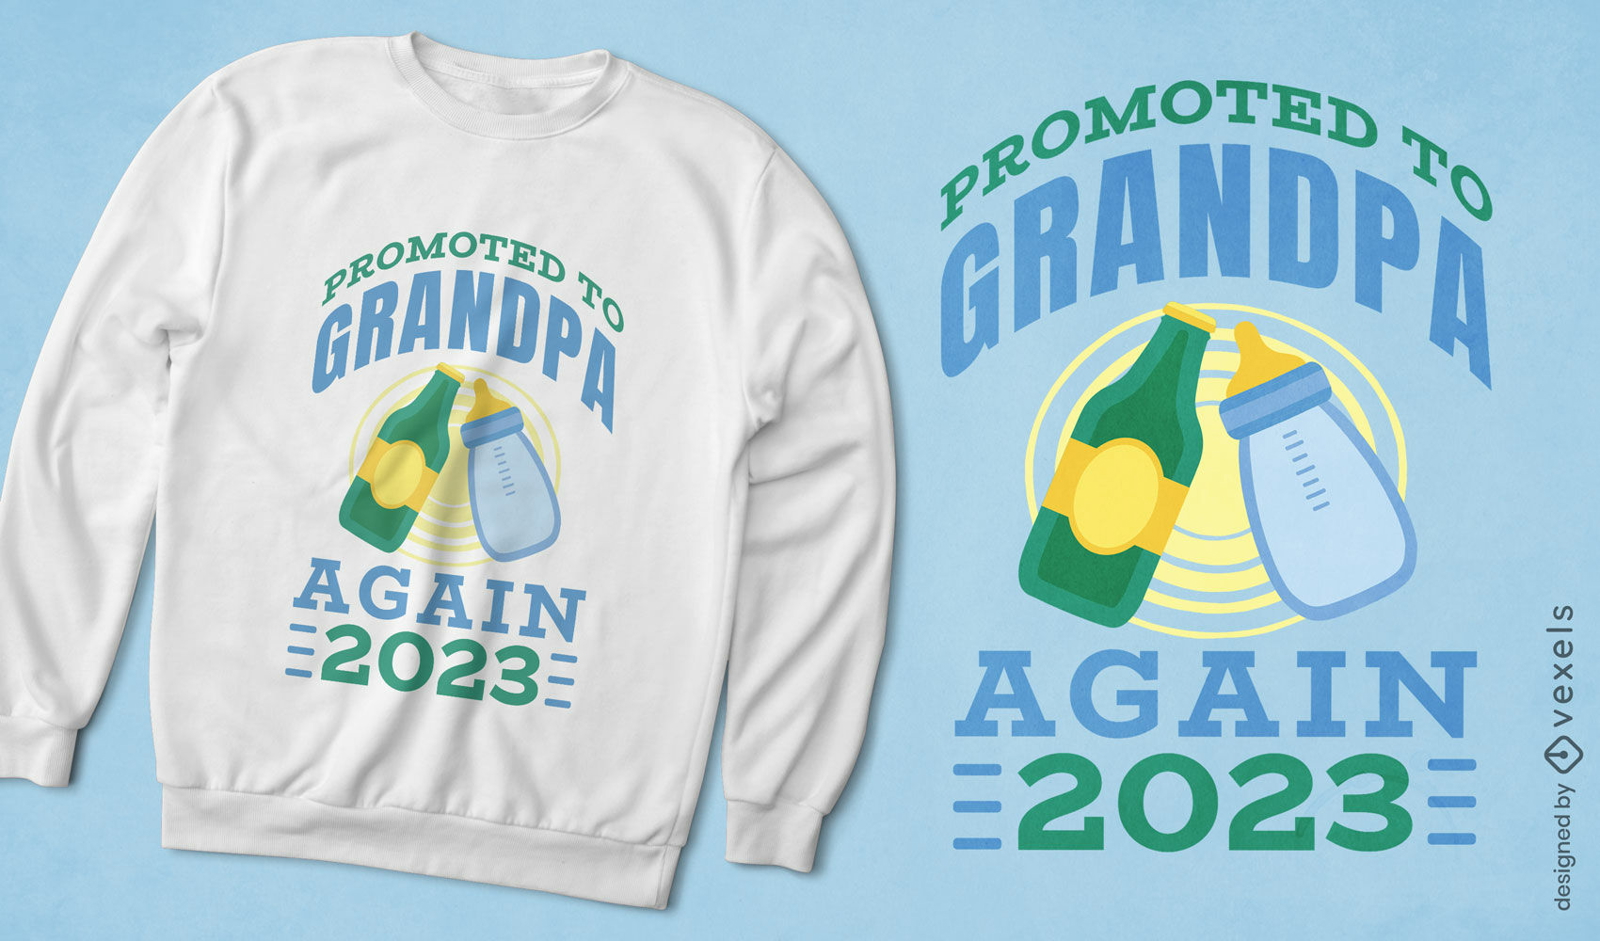 Promoted to grandpa quote t-shirt design